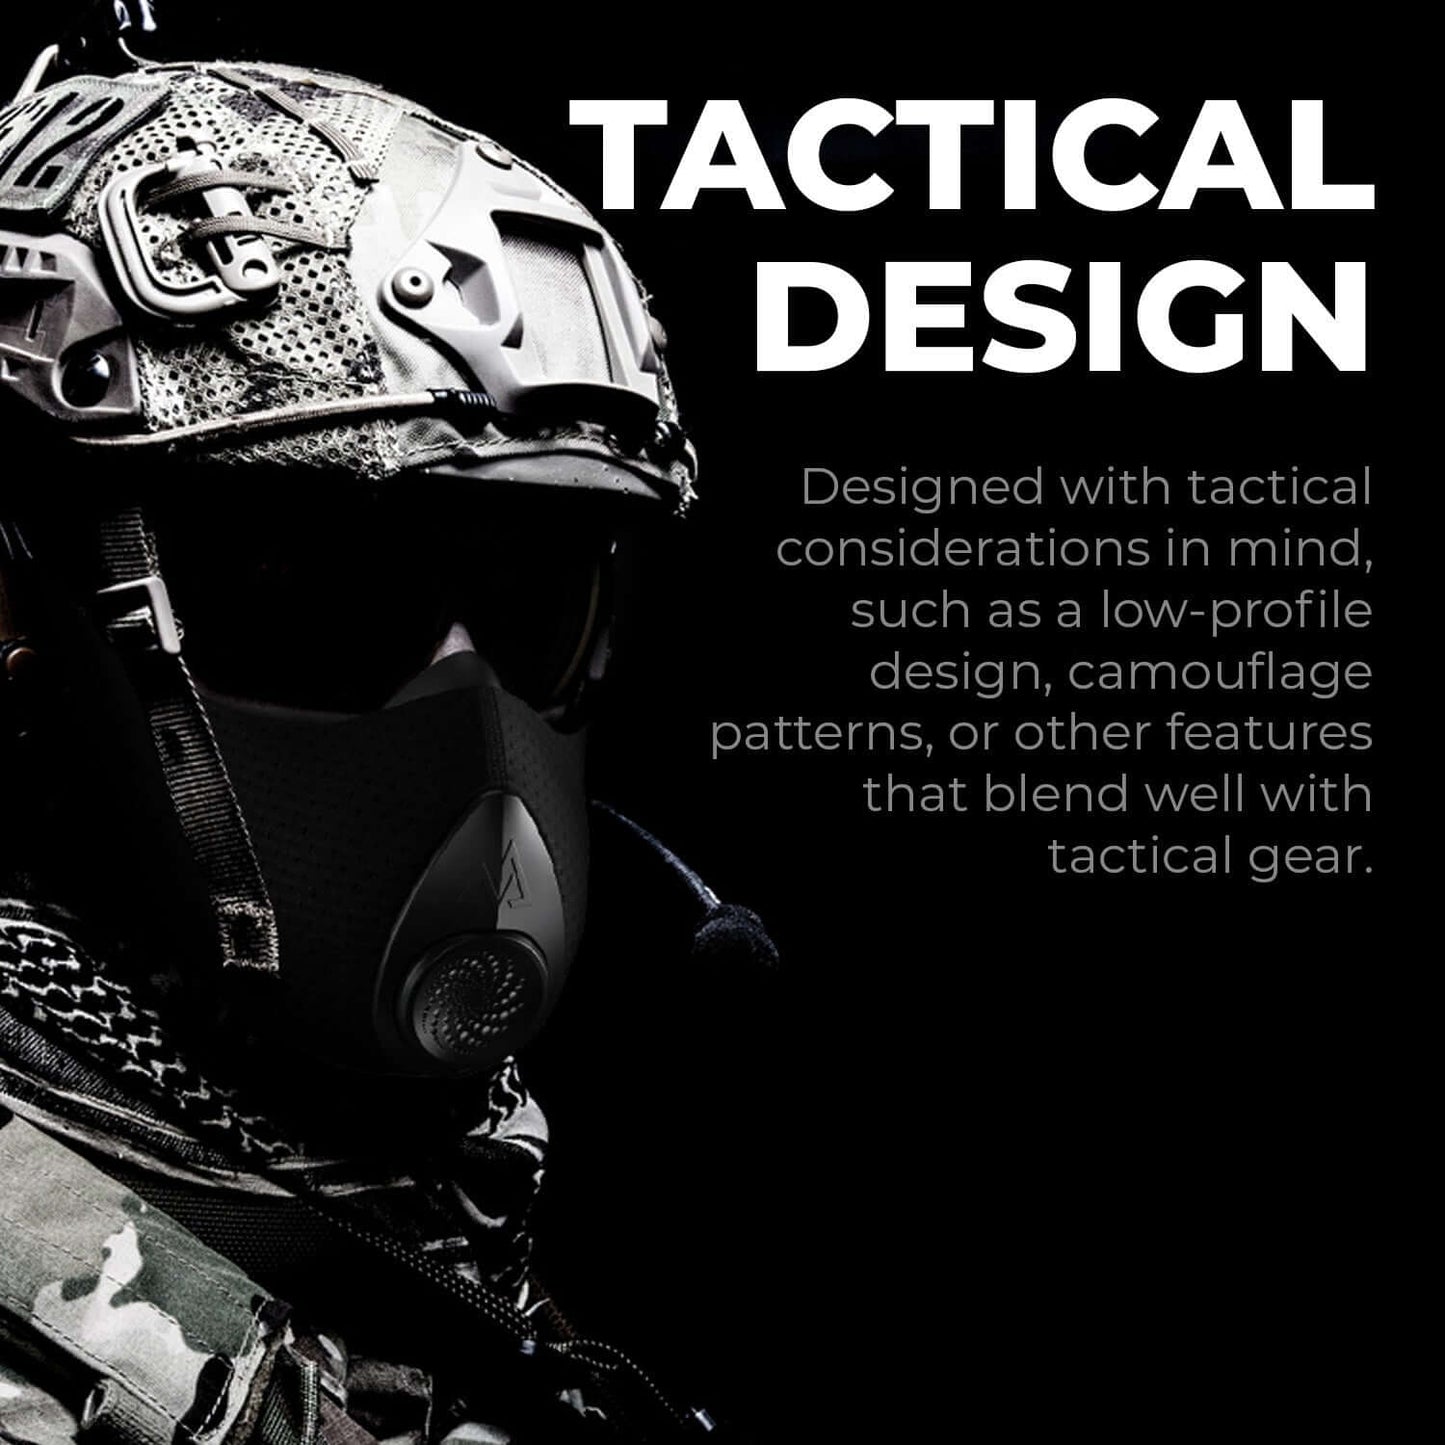 Training Mask Tactical Filtration Mask - Tactical Design with man wearing mask